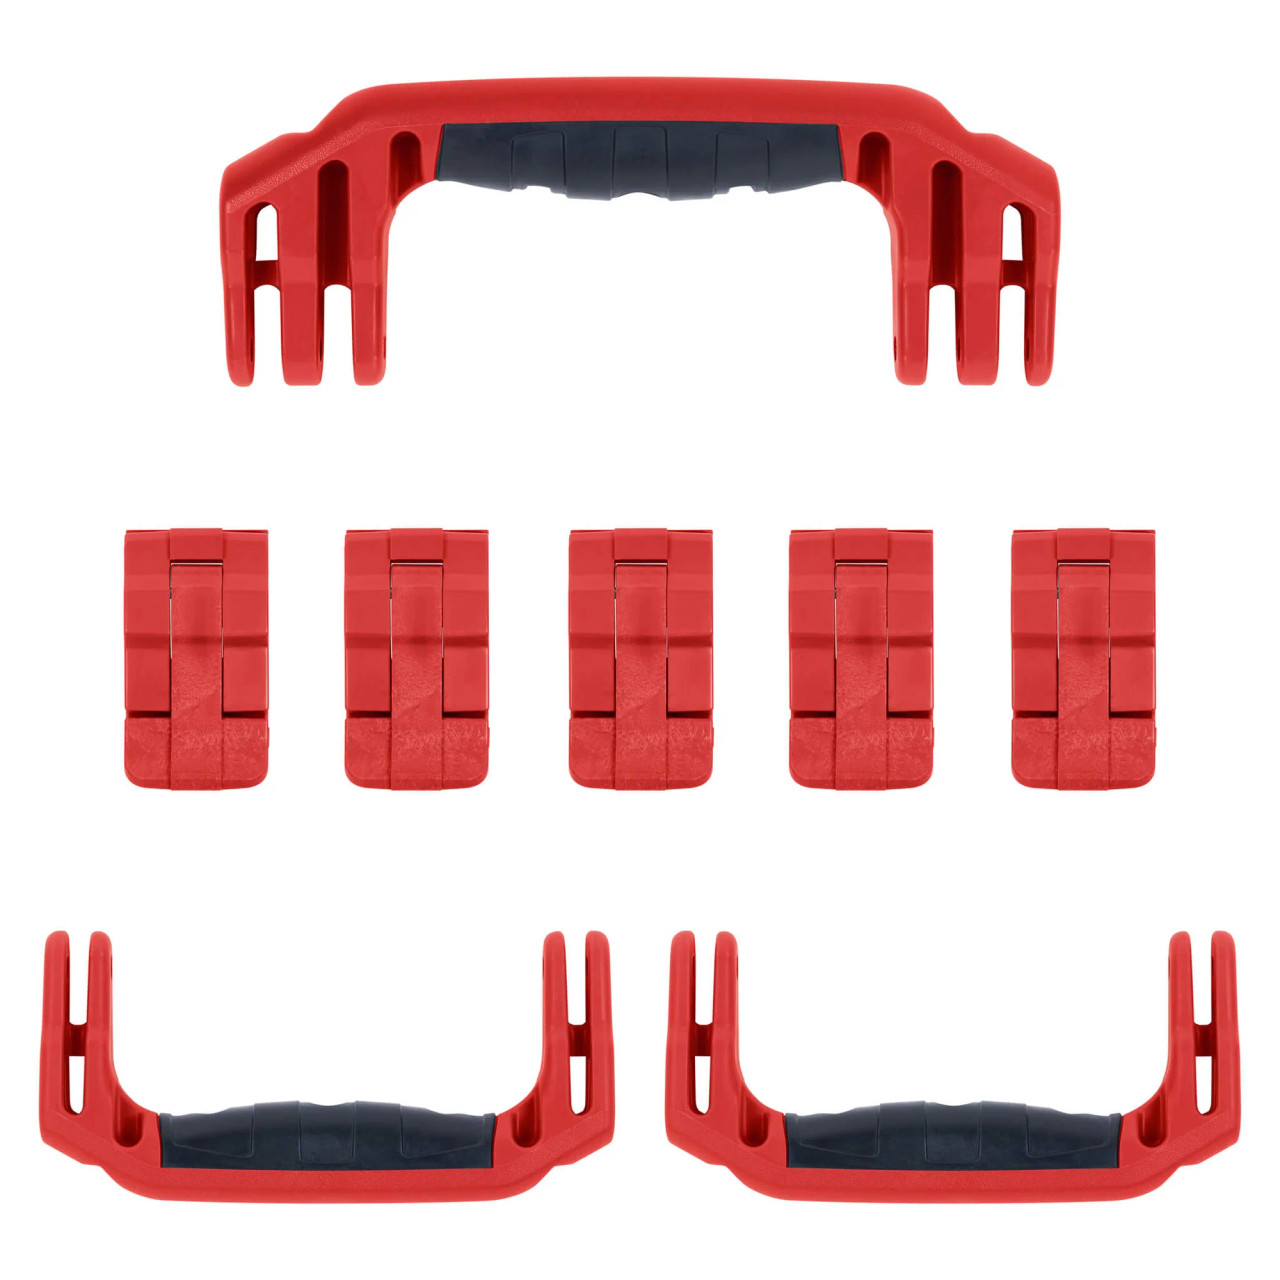  PELICAN 1637 AIR REPLACEMENT HANDLES & LATCHES, RED, DOUBLE-THROW (SET OF 3 HANDLES, 5 LATCHES)